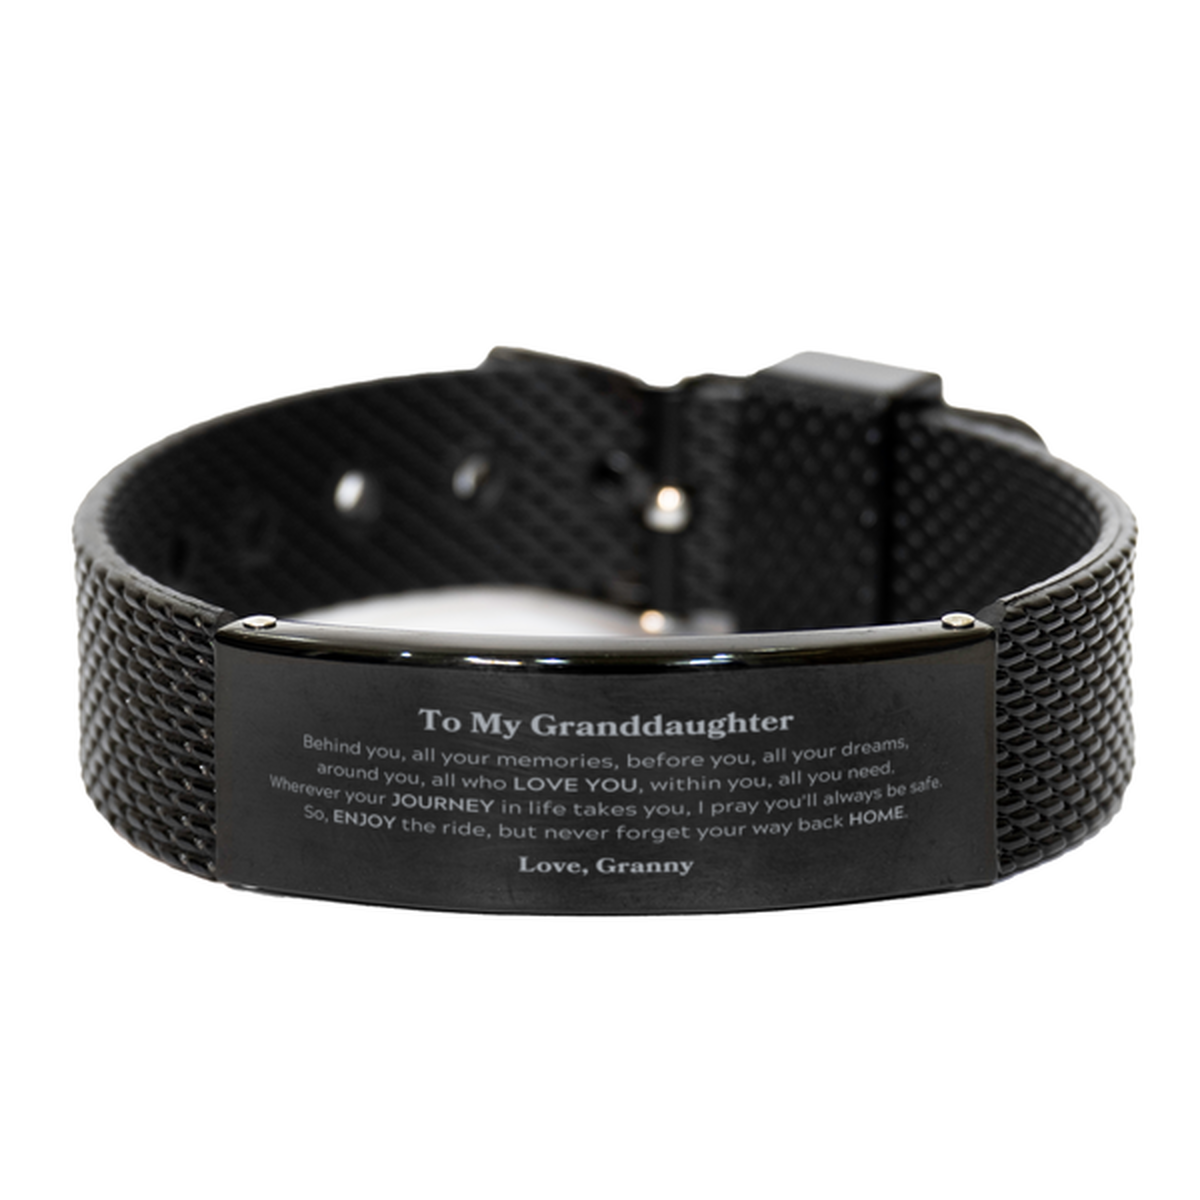 To My Granddaughter Graduation Gifts from Granny, Granddaughter Black Shark Mesh Bracelet Christmas Birthday Gifts for Granddaughter Behind you, all your memories, before you, all your dreams. Love, Granny